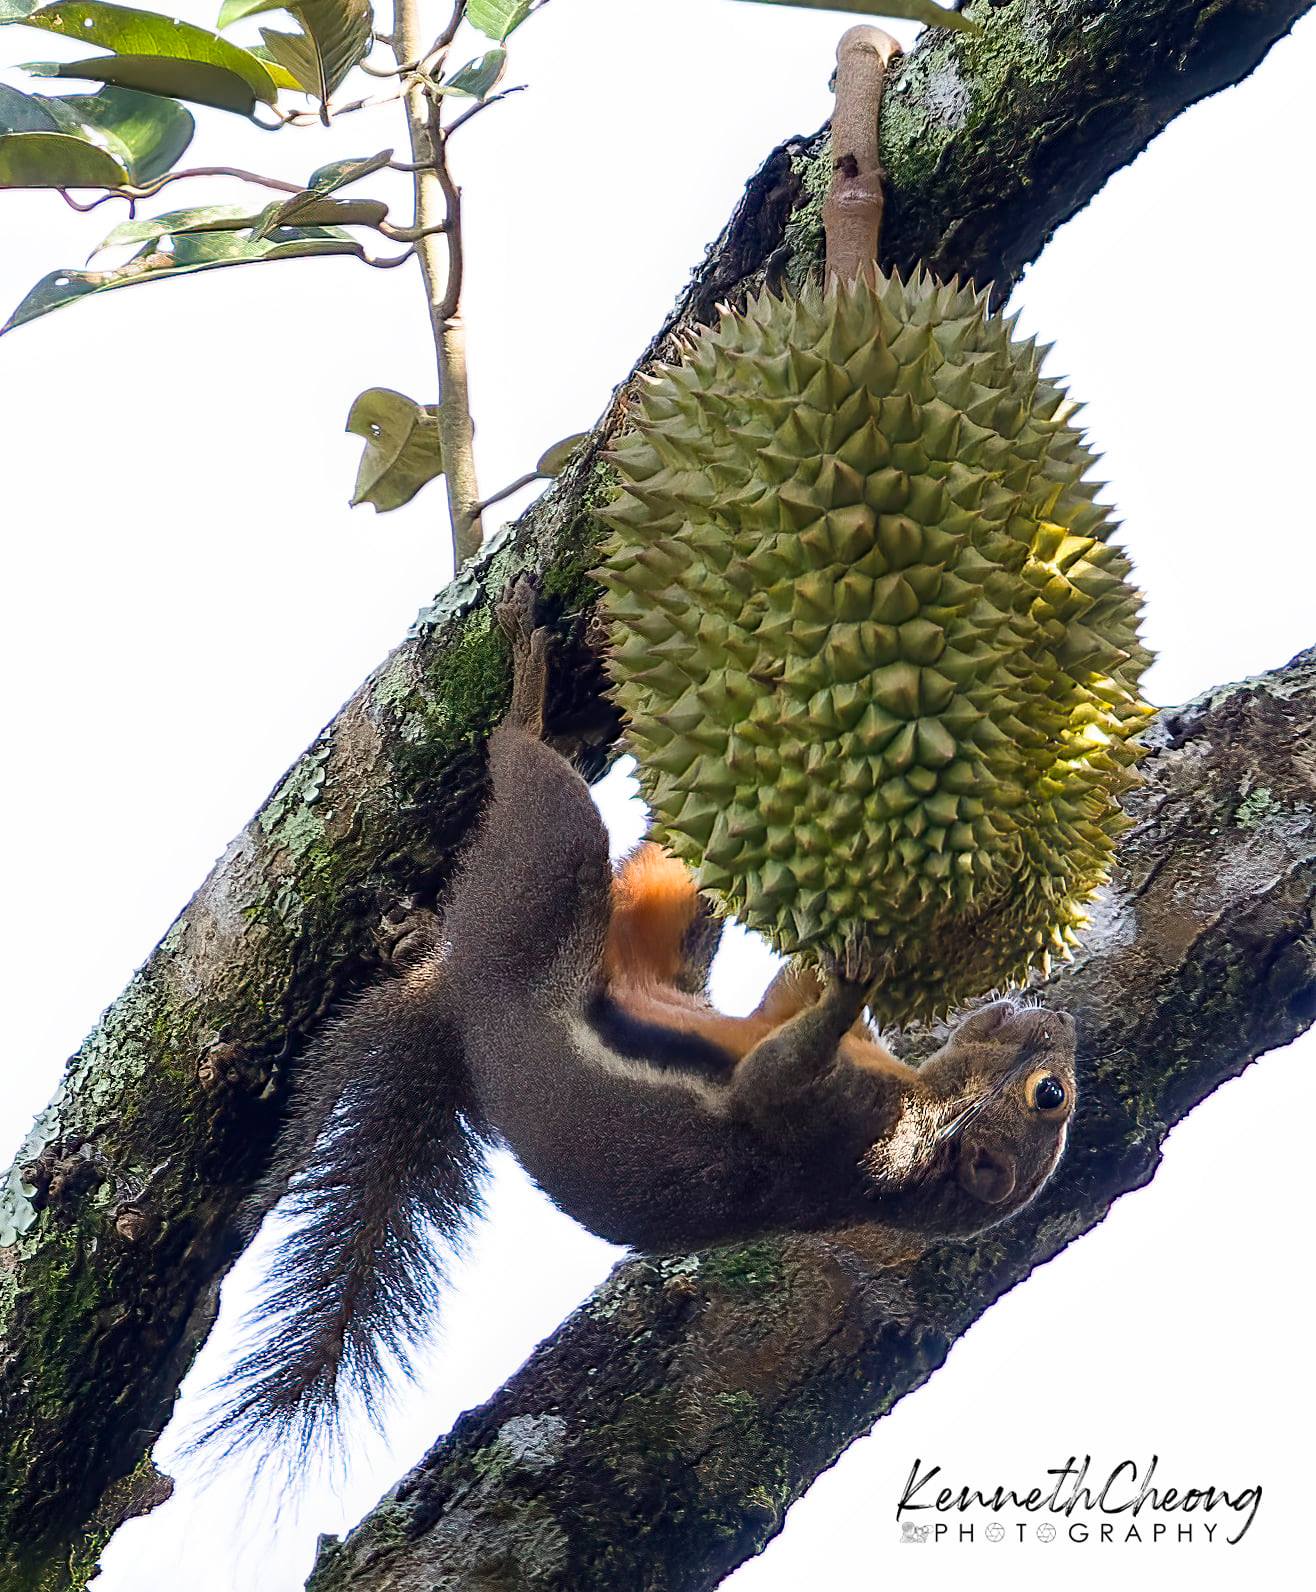 Squirrel dangling upside down, durian in hand